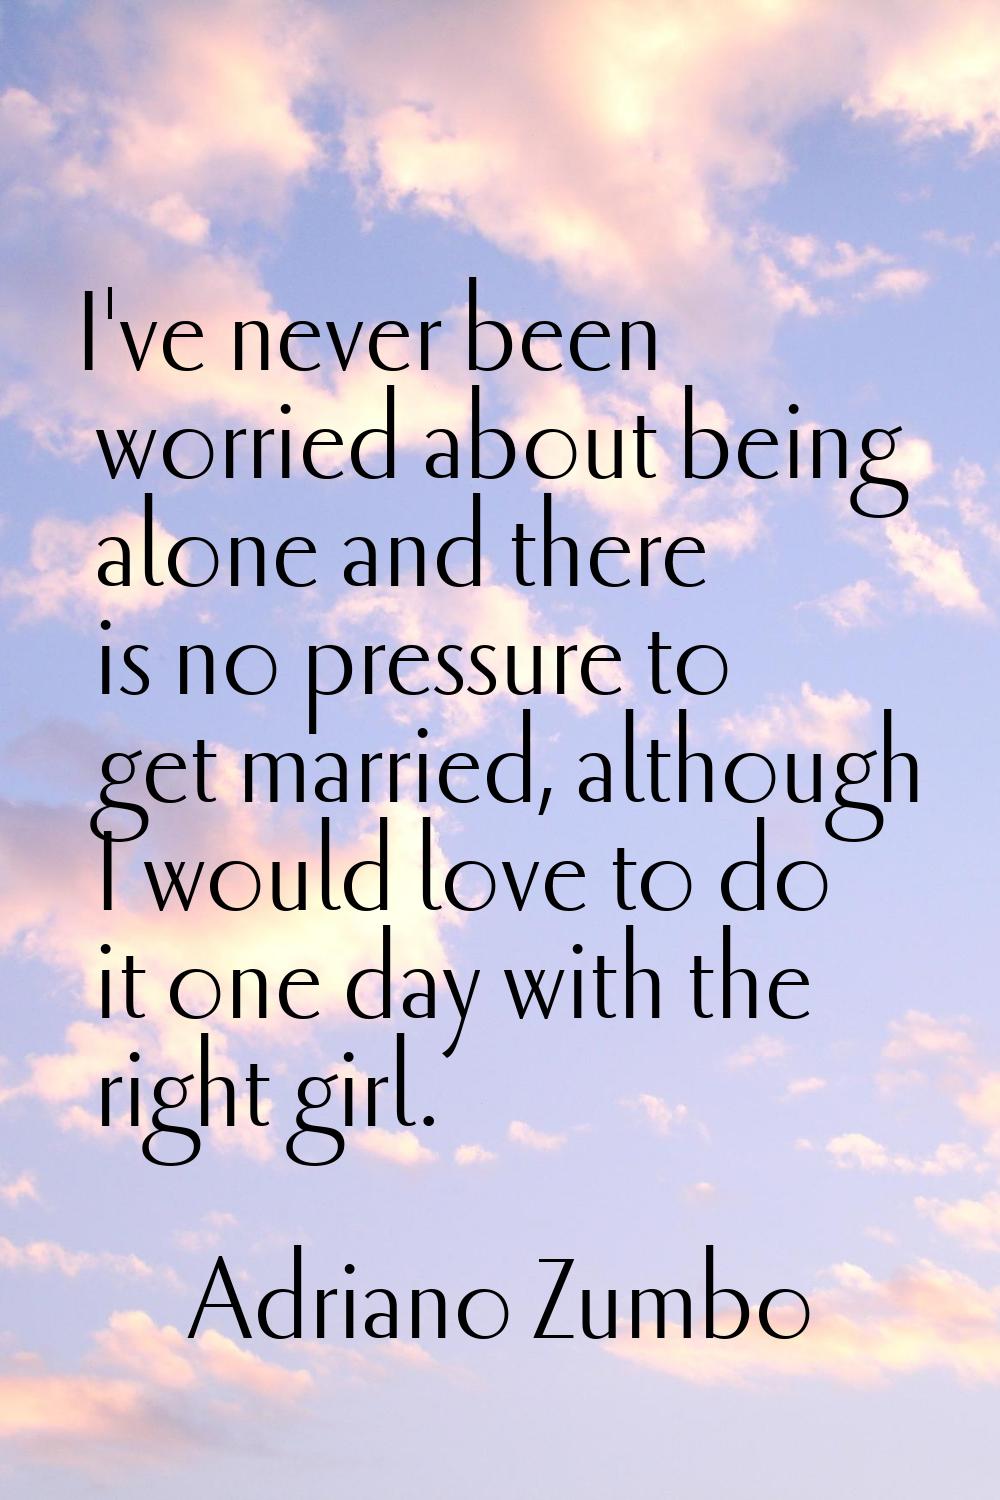 I've never been worried about being alone and there is no pressure to get married, although I would